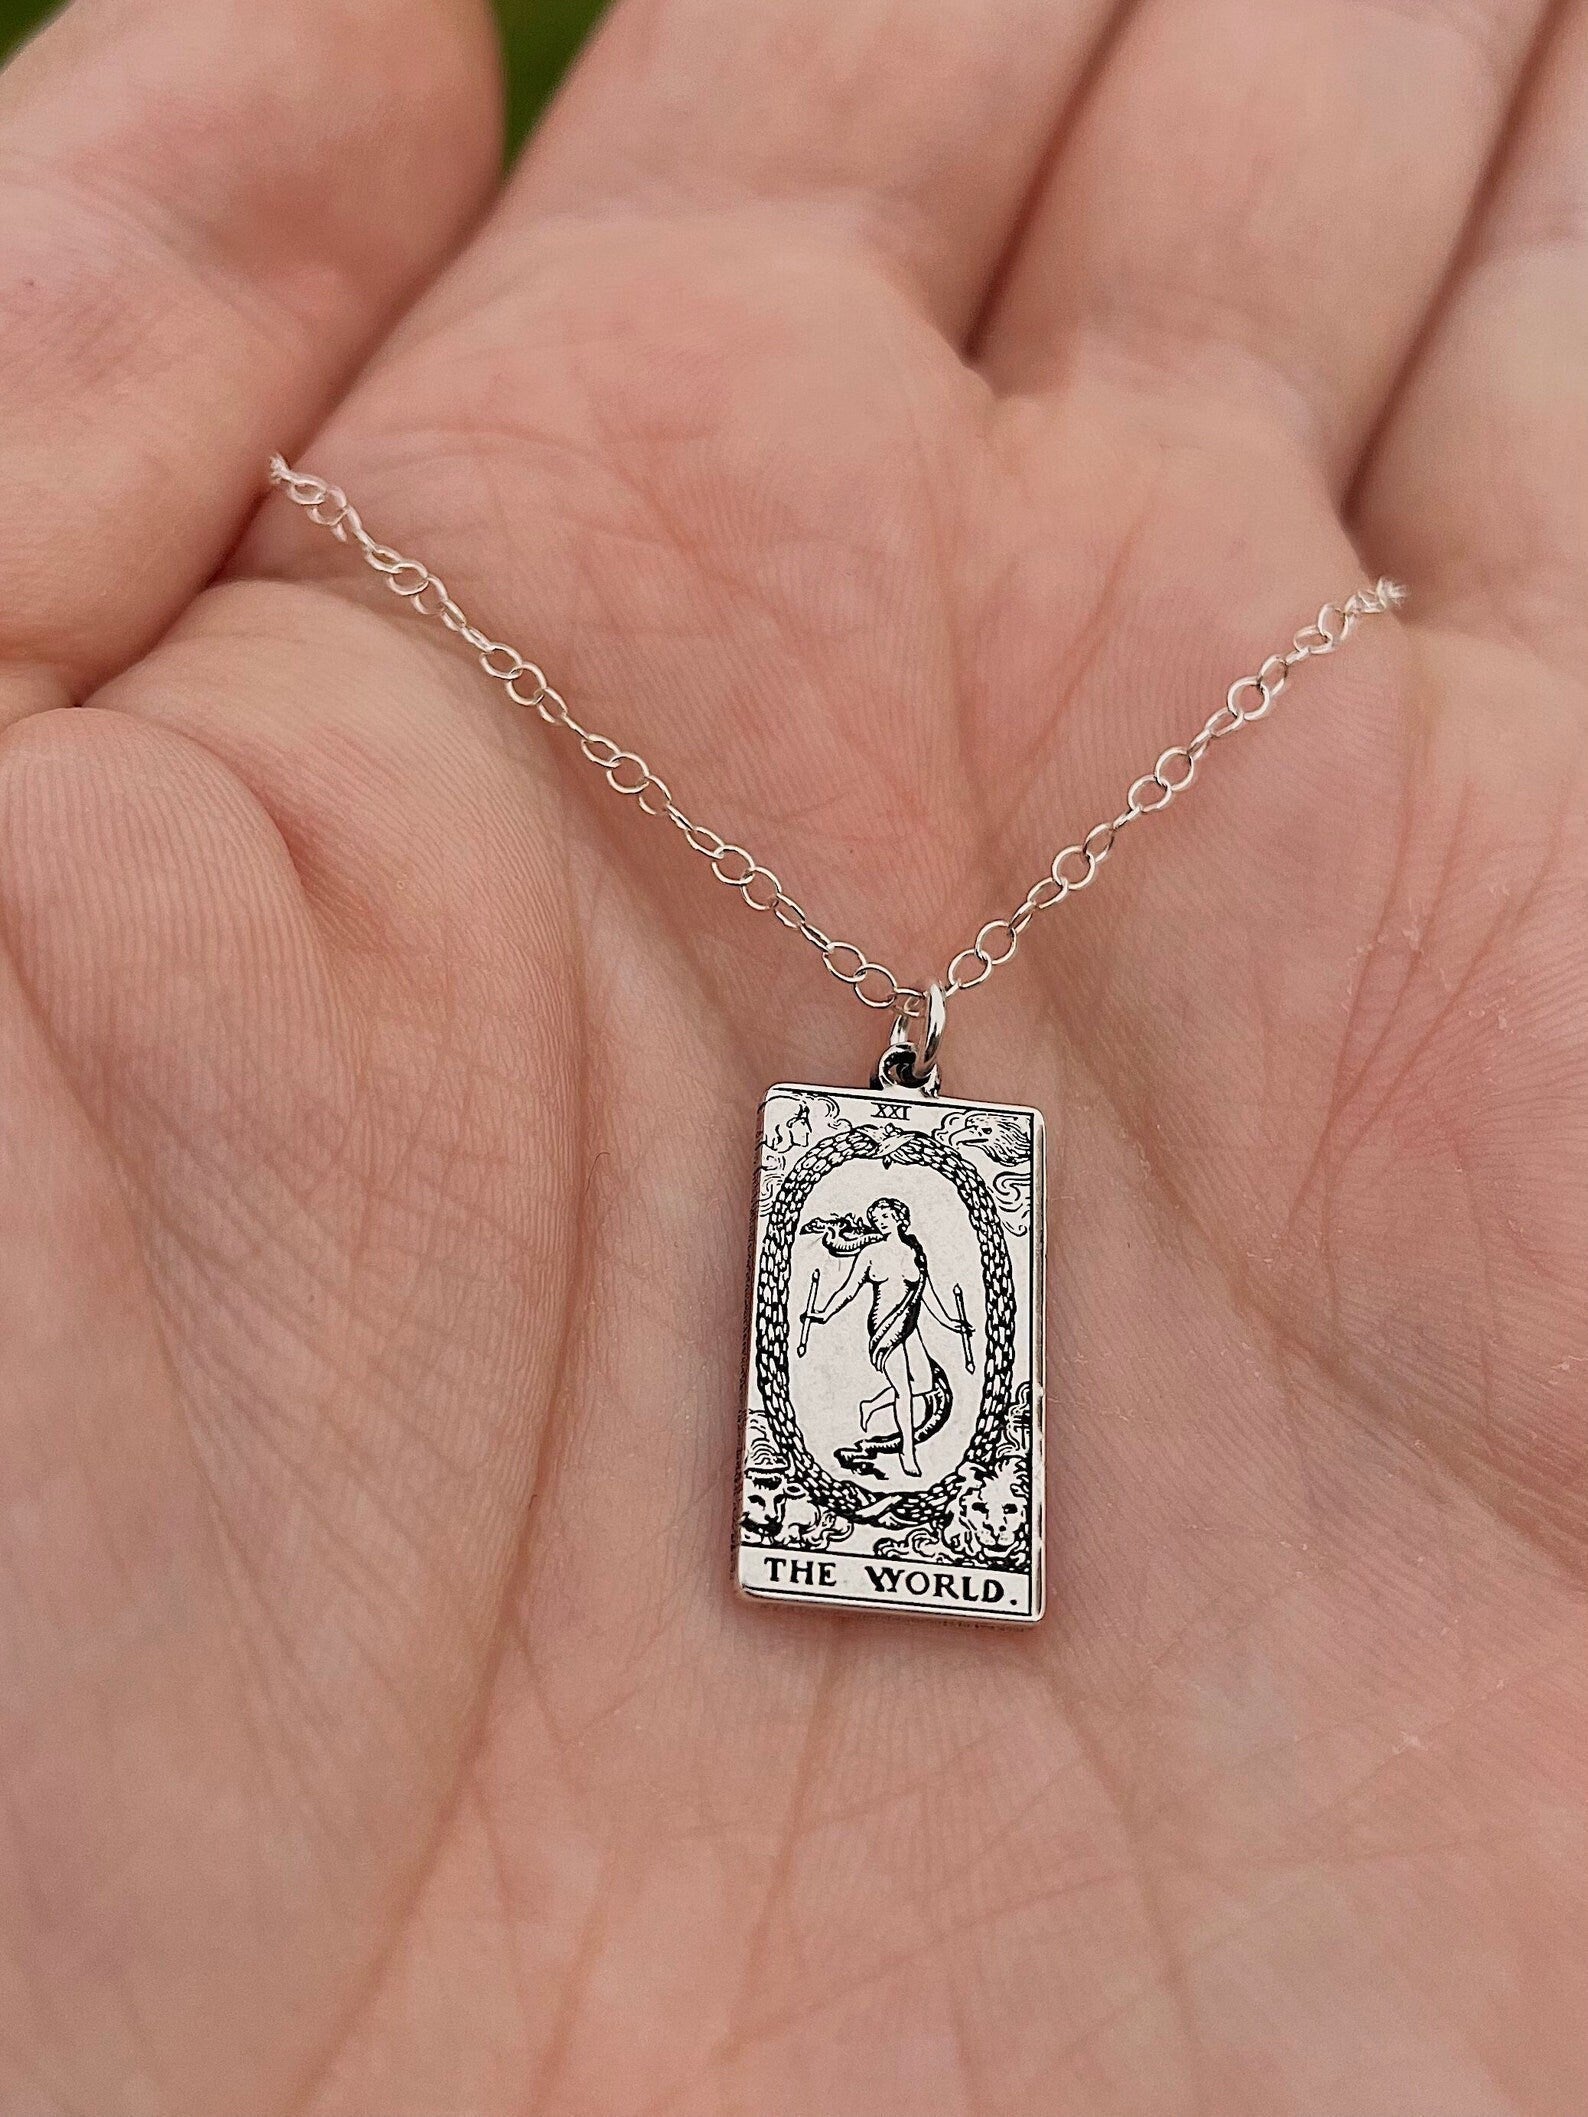 The World Tarot Card Necklace - Sterling Silver